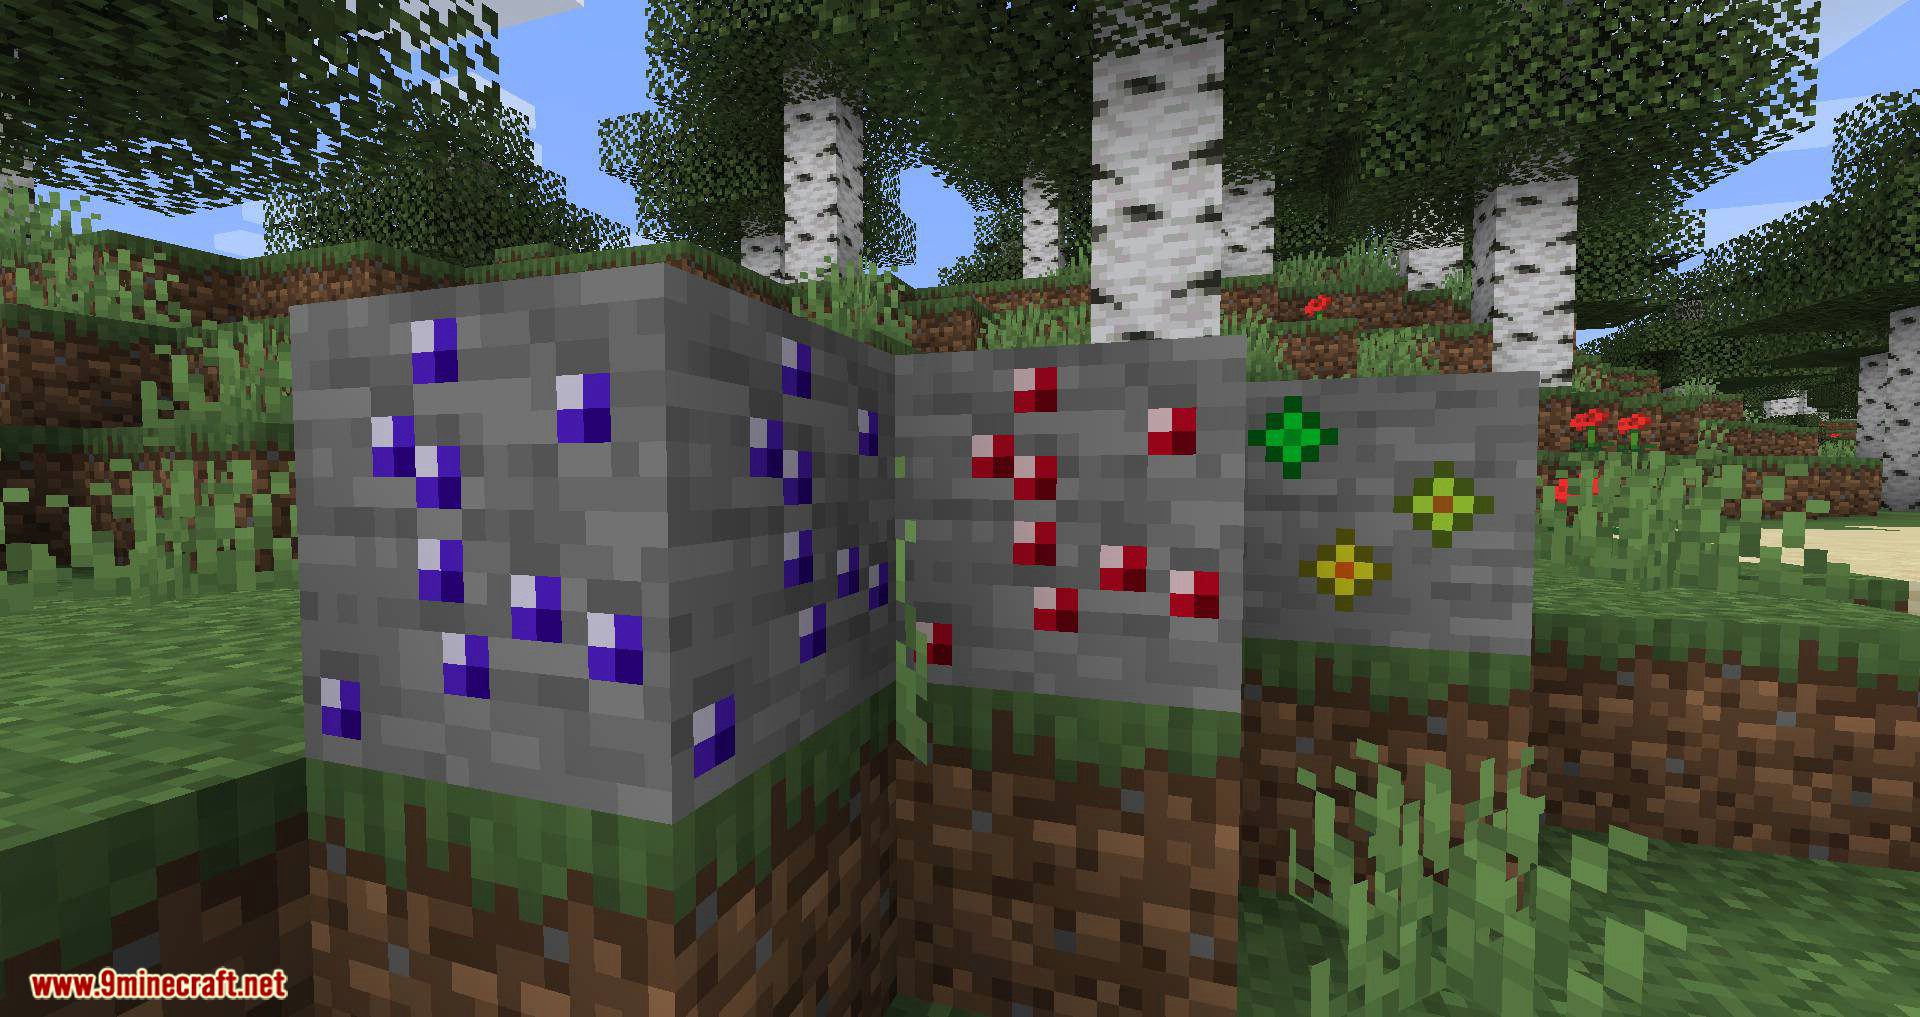 More Ores In ONE Mod (1.19.2, 1.18.2) - Ores in the Overworld, Nether, and End 6